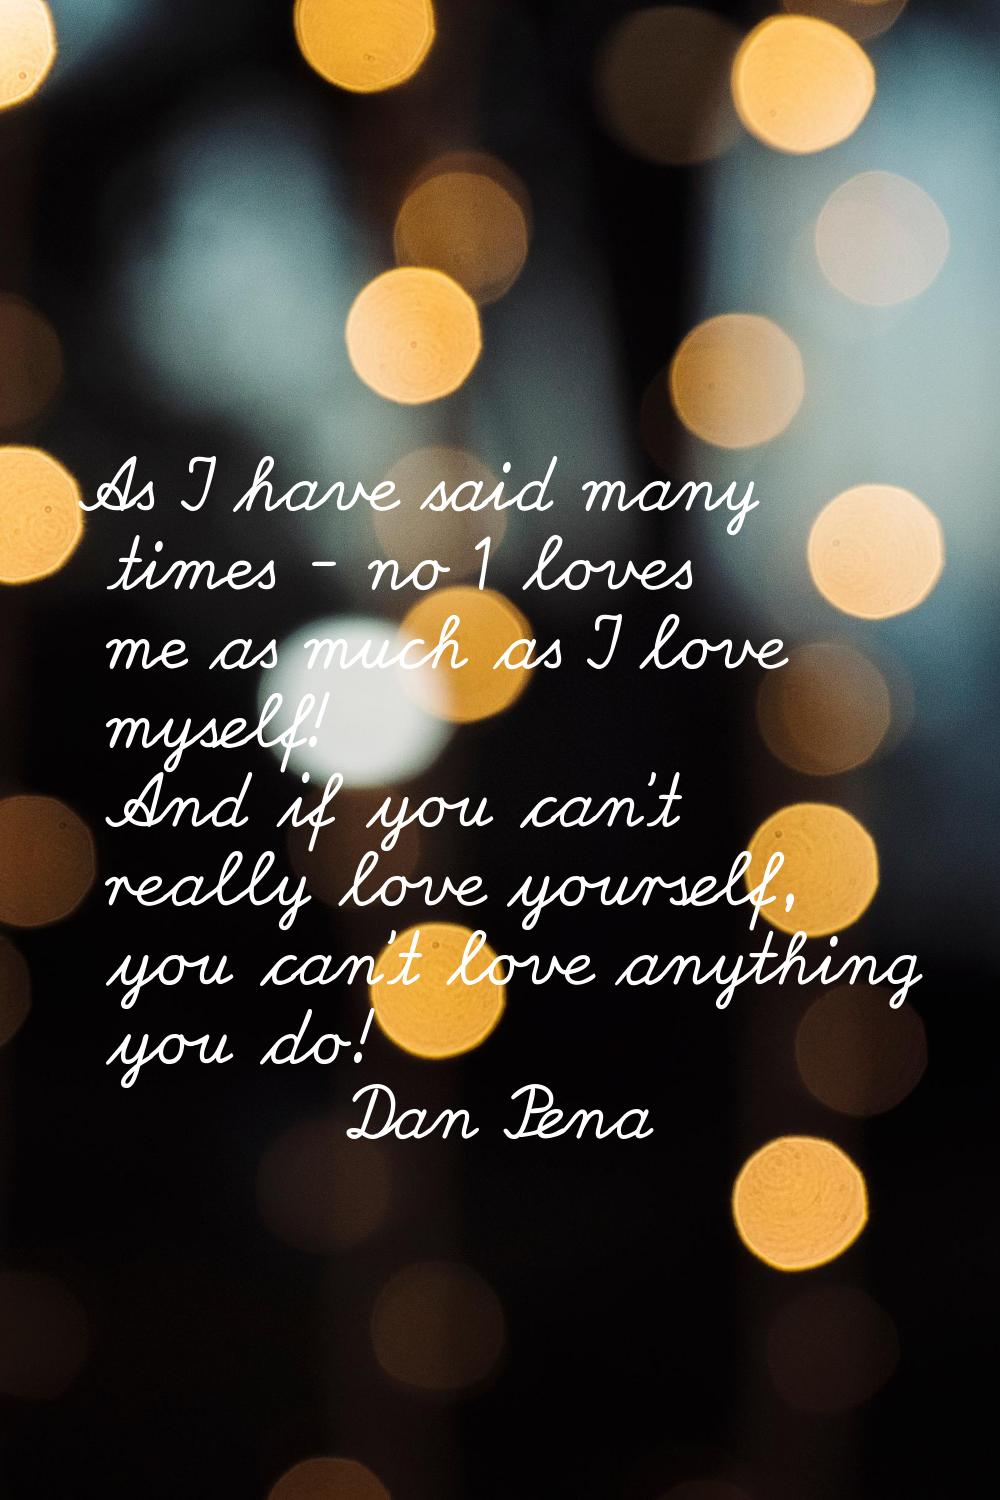 As I have said many times - no 1 loves me as much as I love myself! And if you can't really love yo